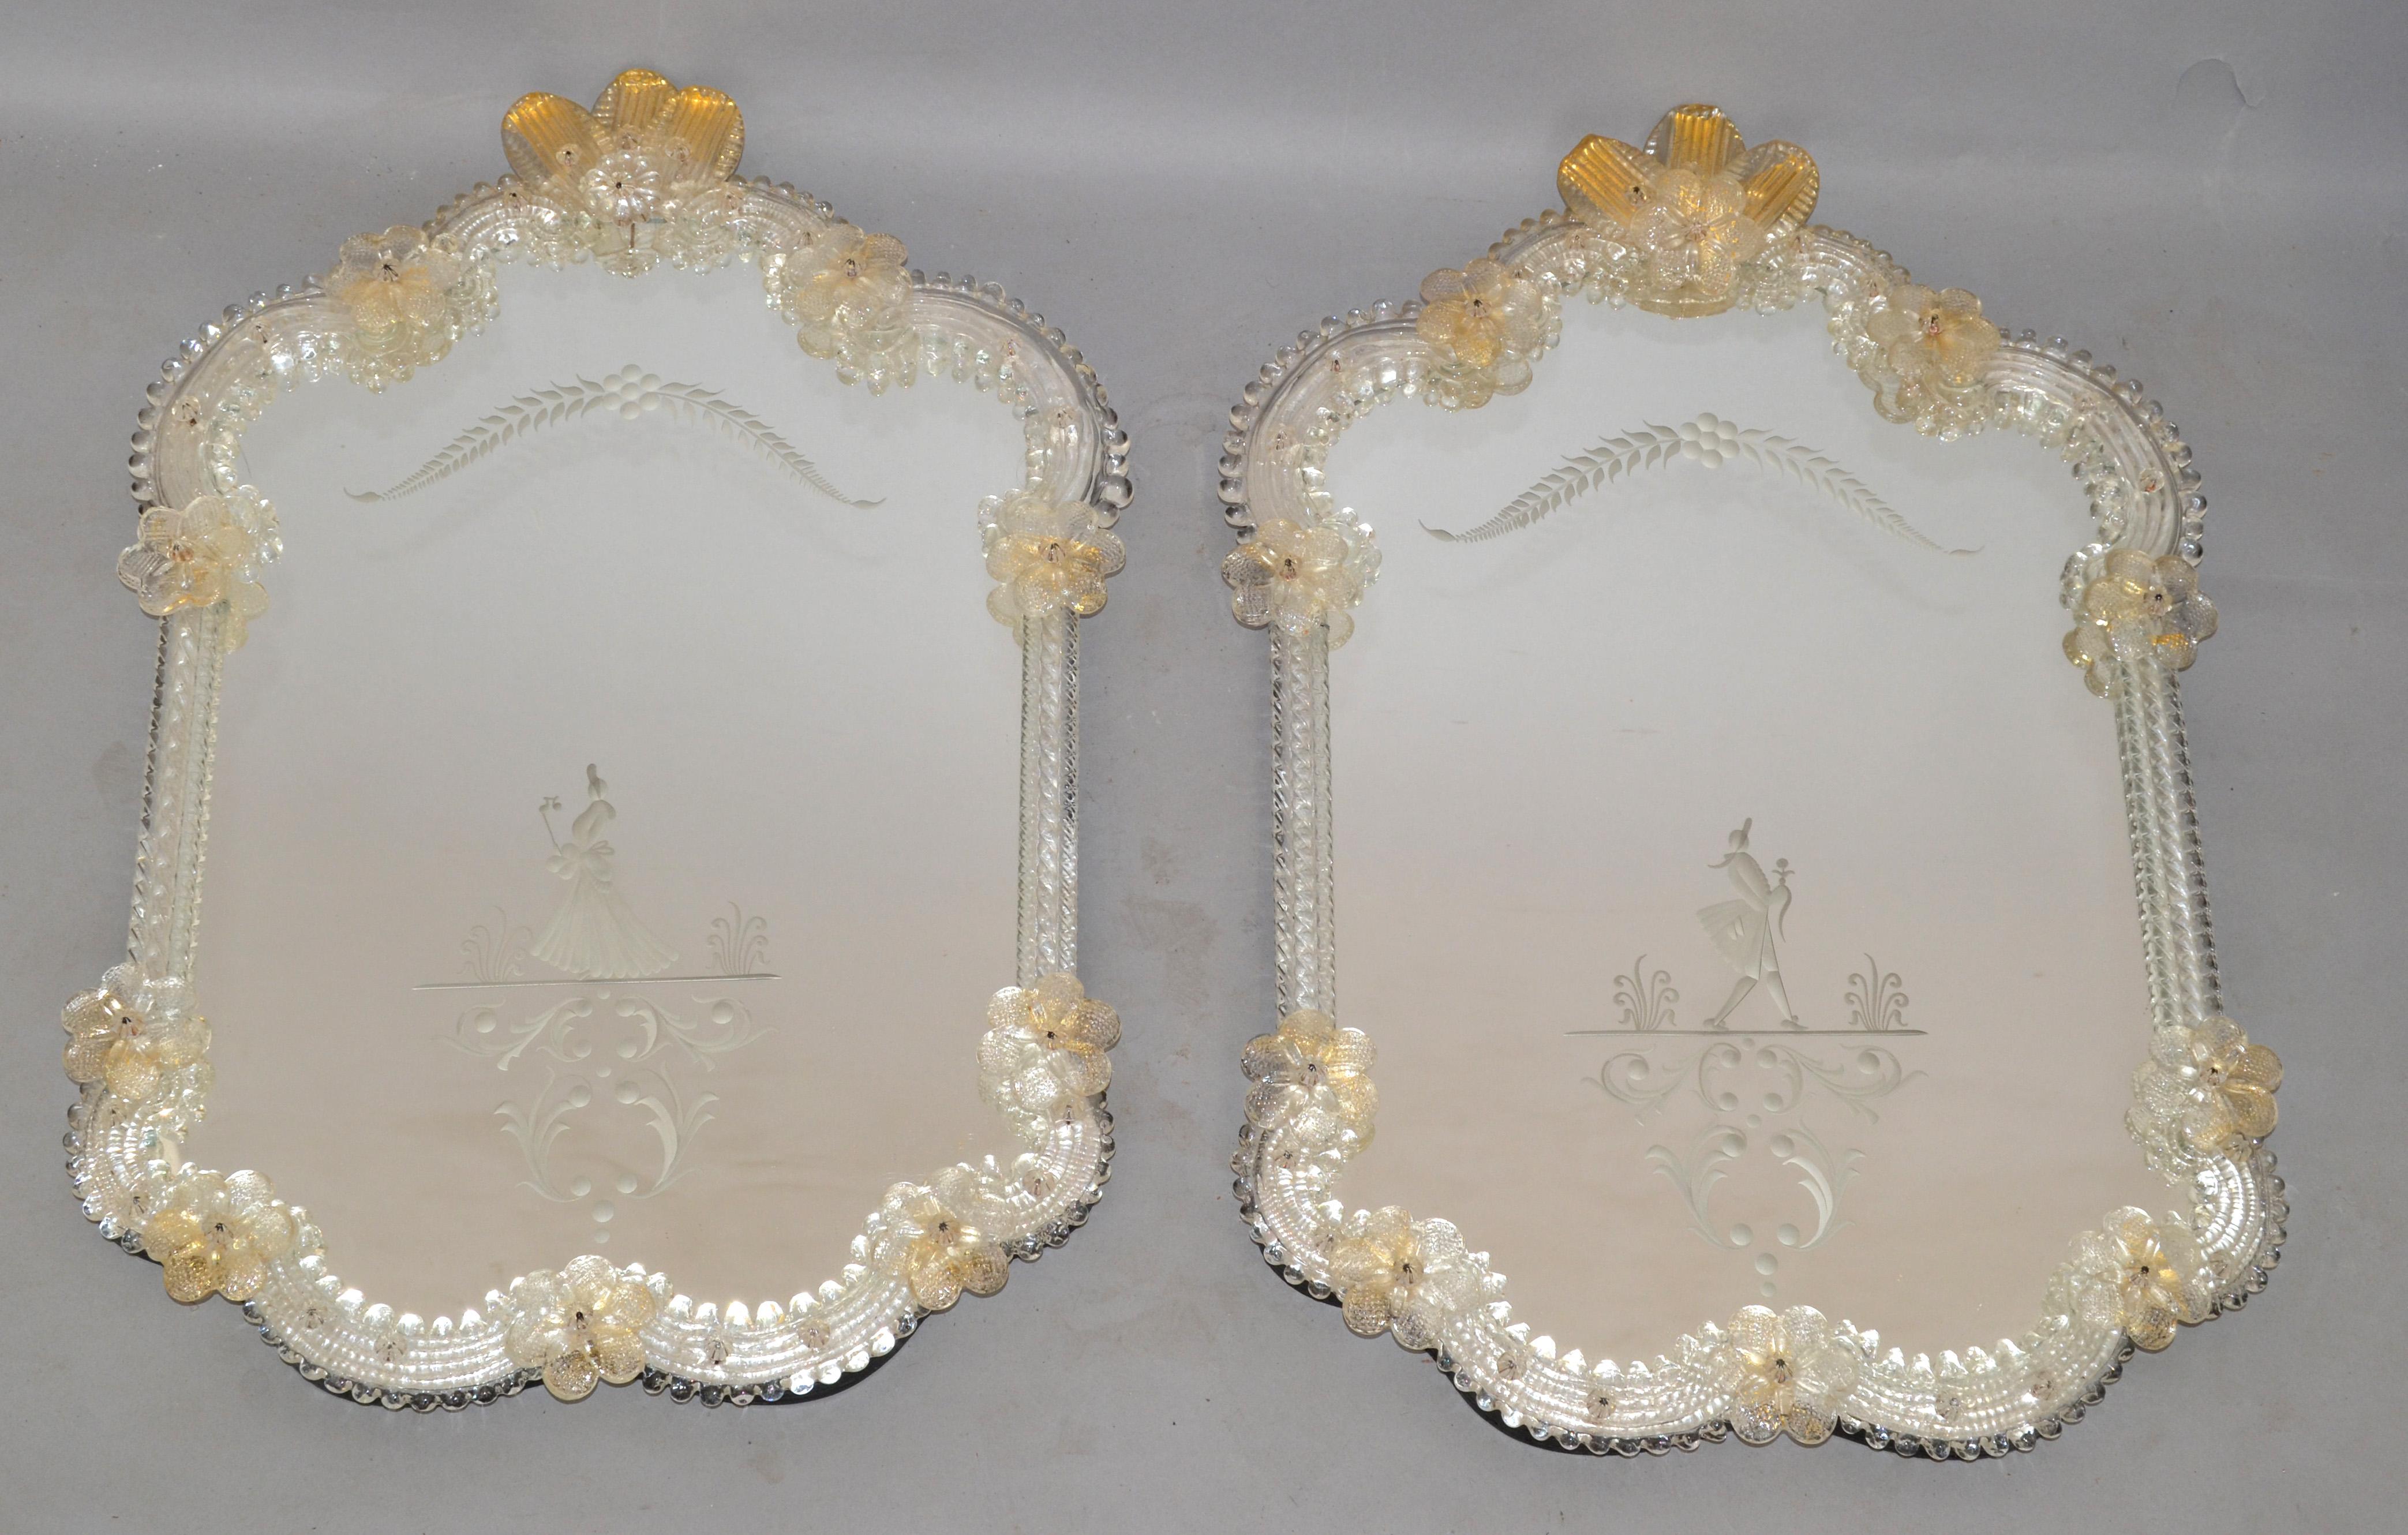 Rococo Revival Him and Her Etched Venetian Wall Mirror Bohemian Golden Flowers For Sale 11